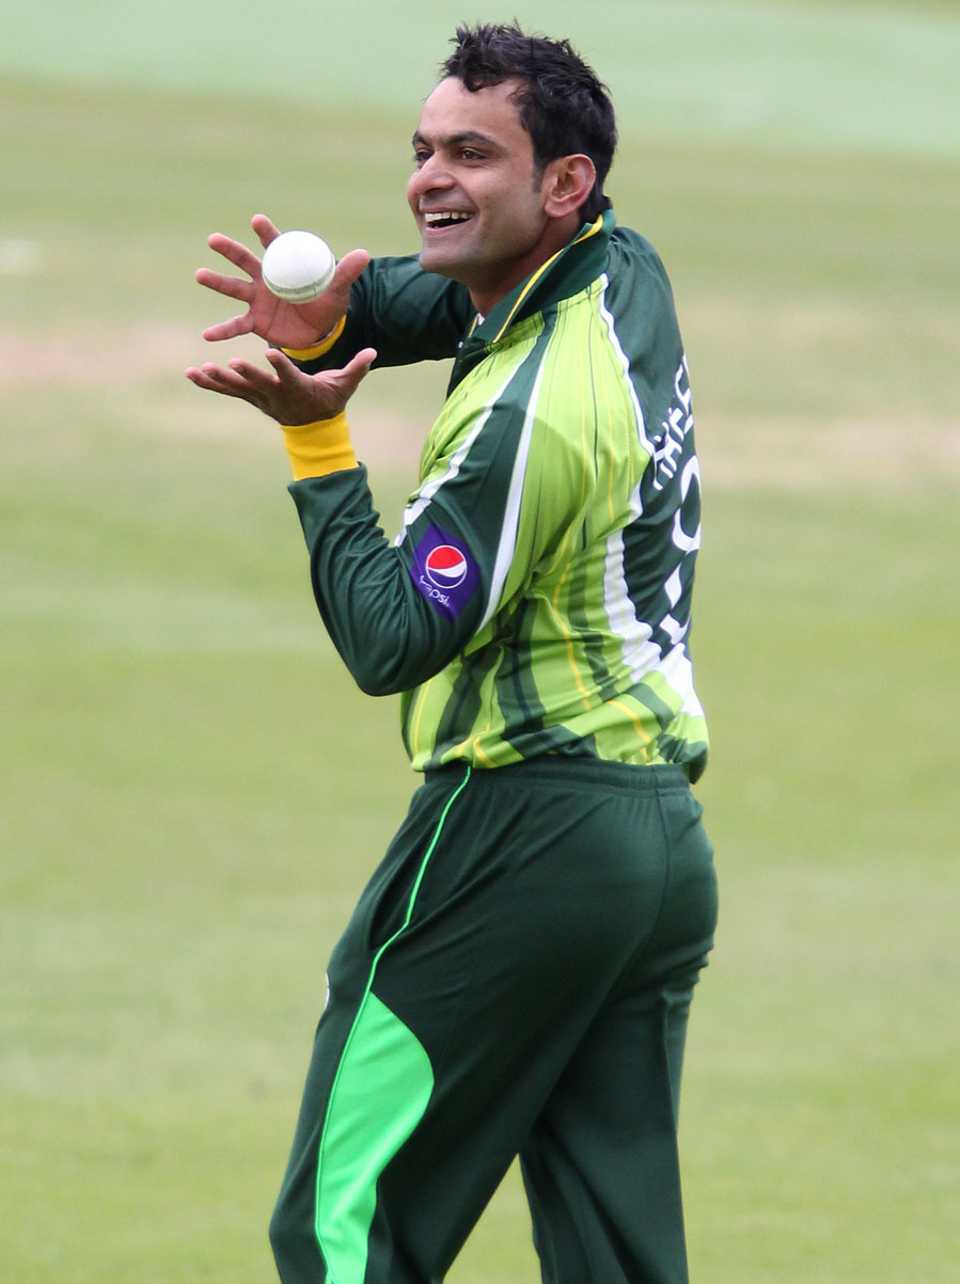 Mohammad Hafeez has a laugh before bowling a ball